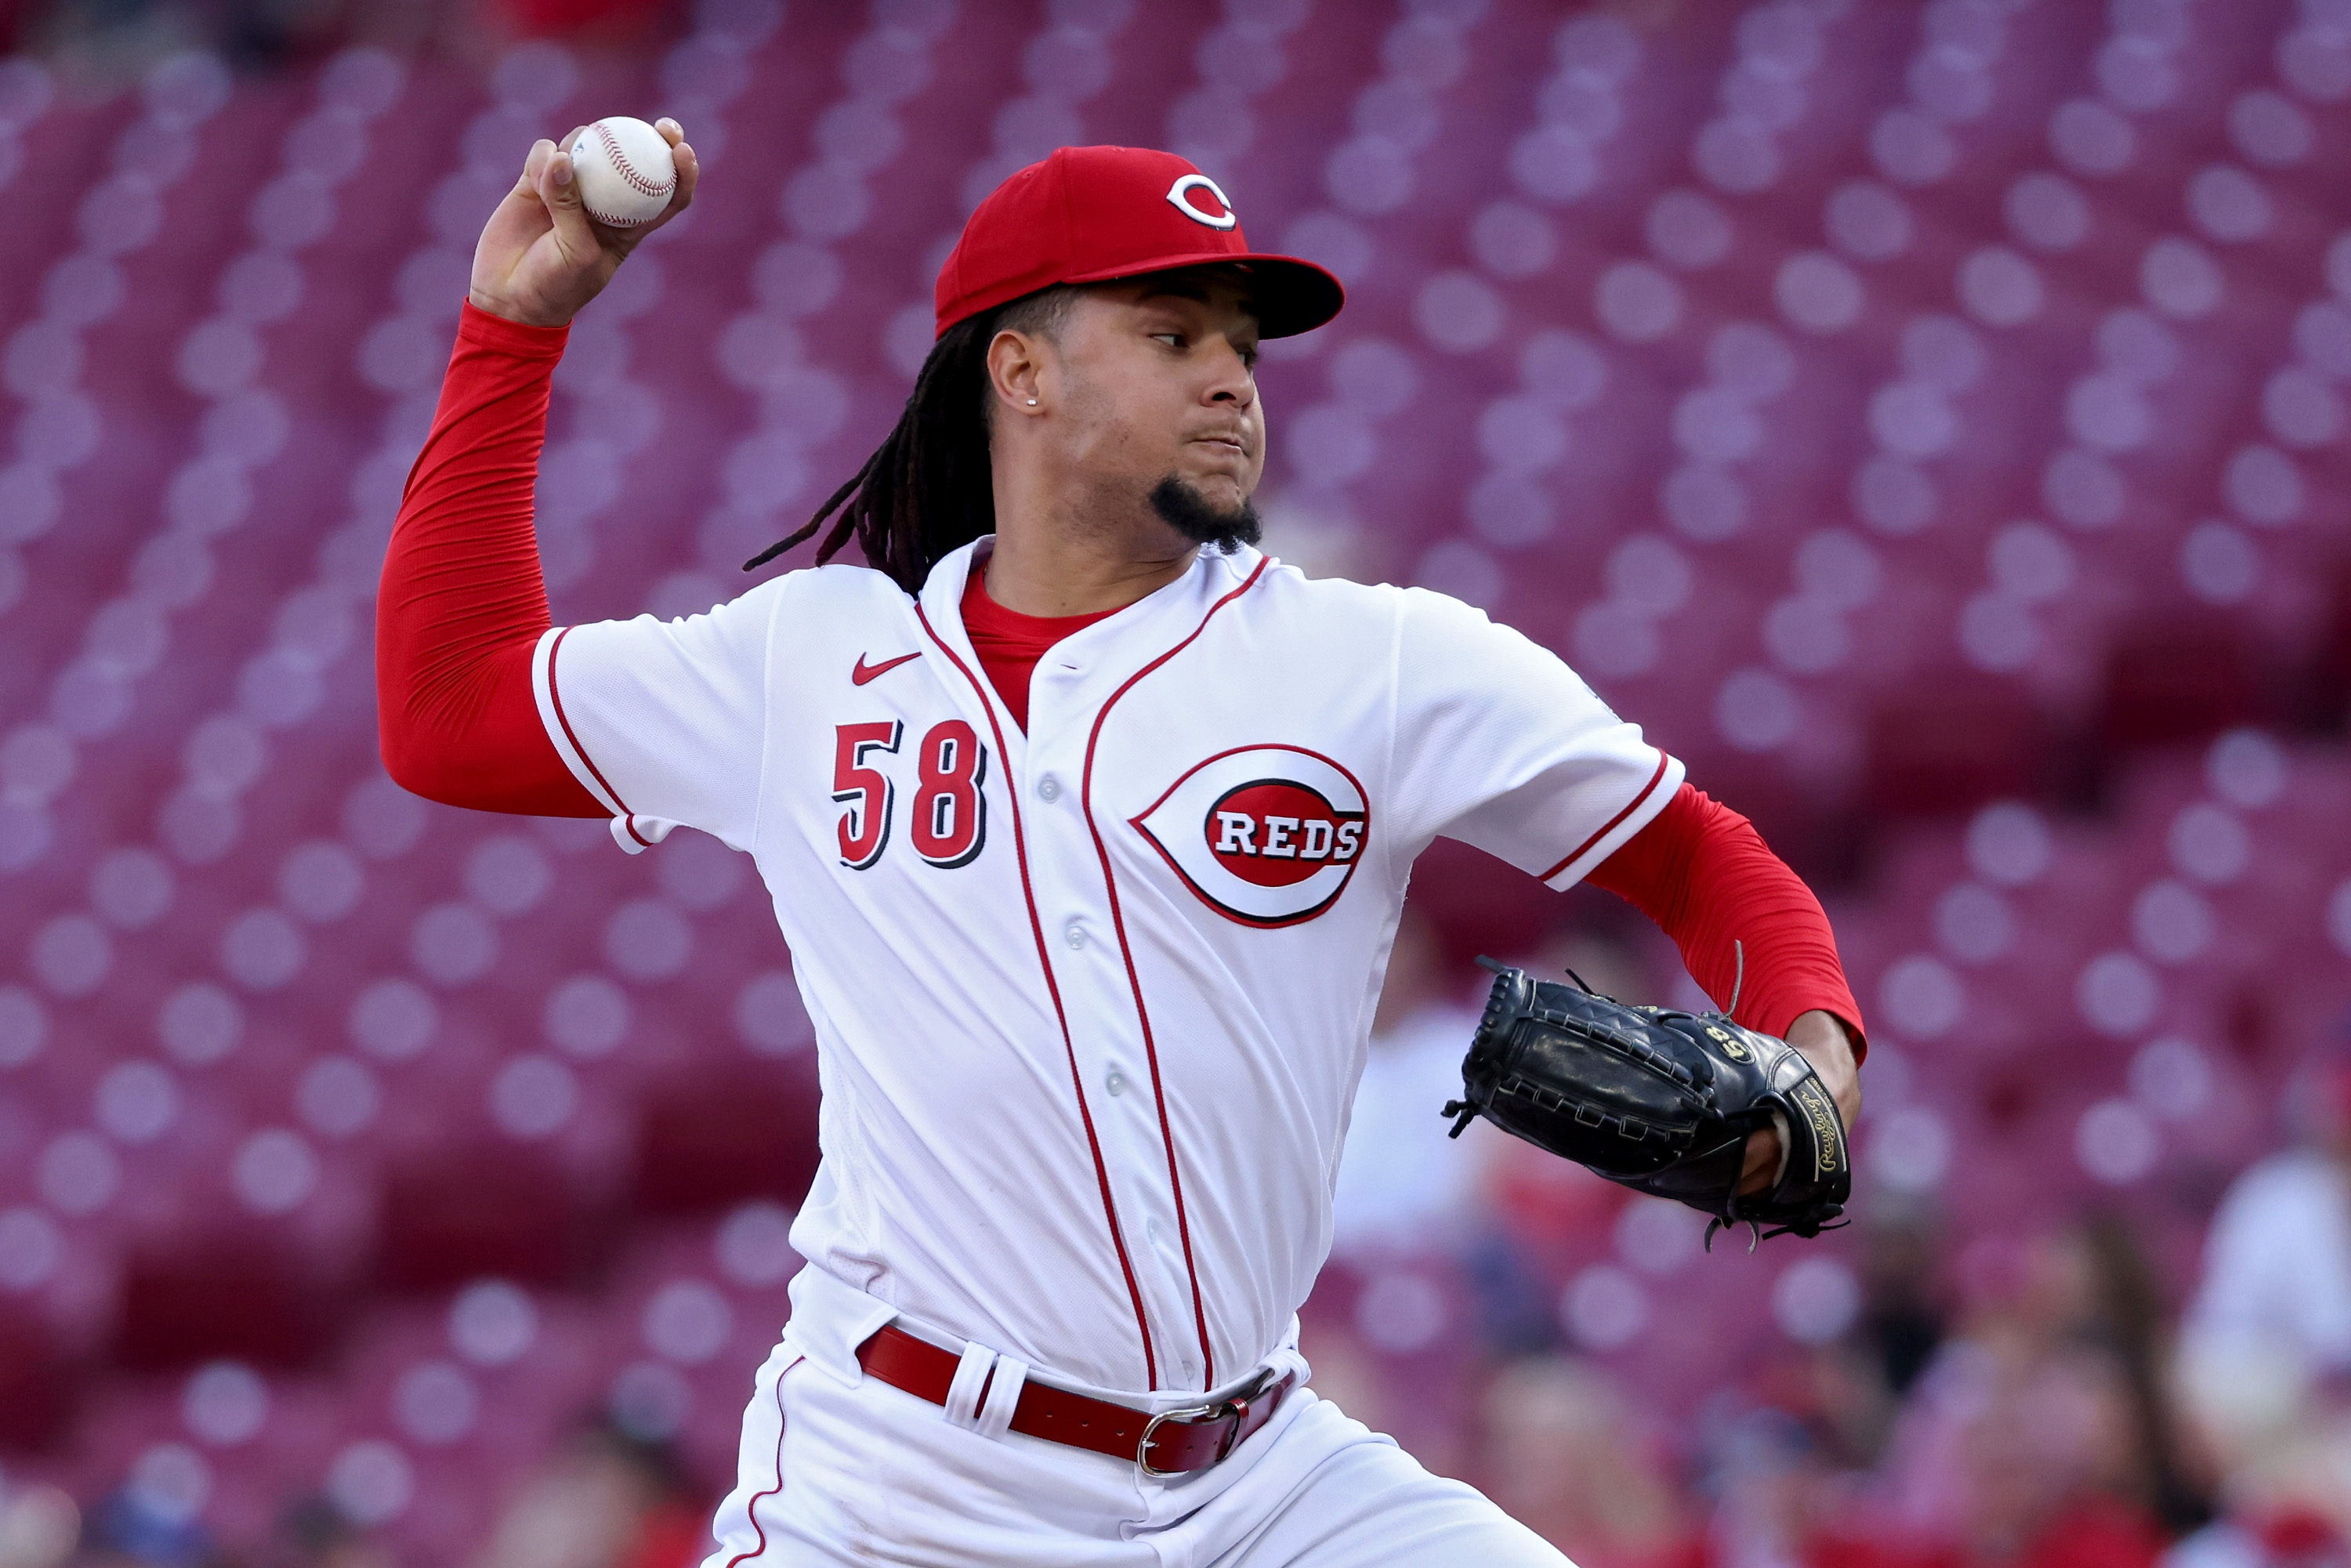 Mariners acquire Reds All-Star pitcher Luis Castillo in trade